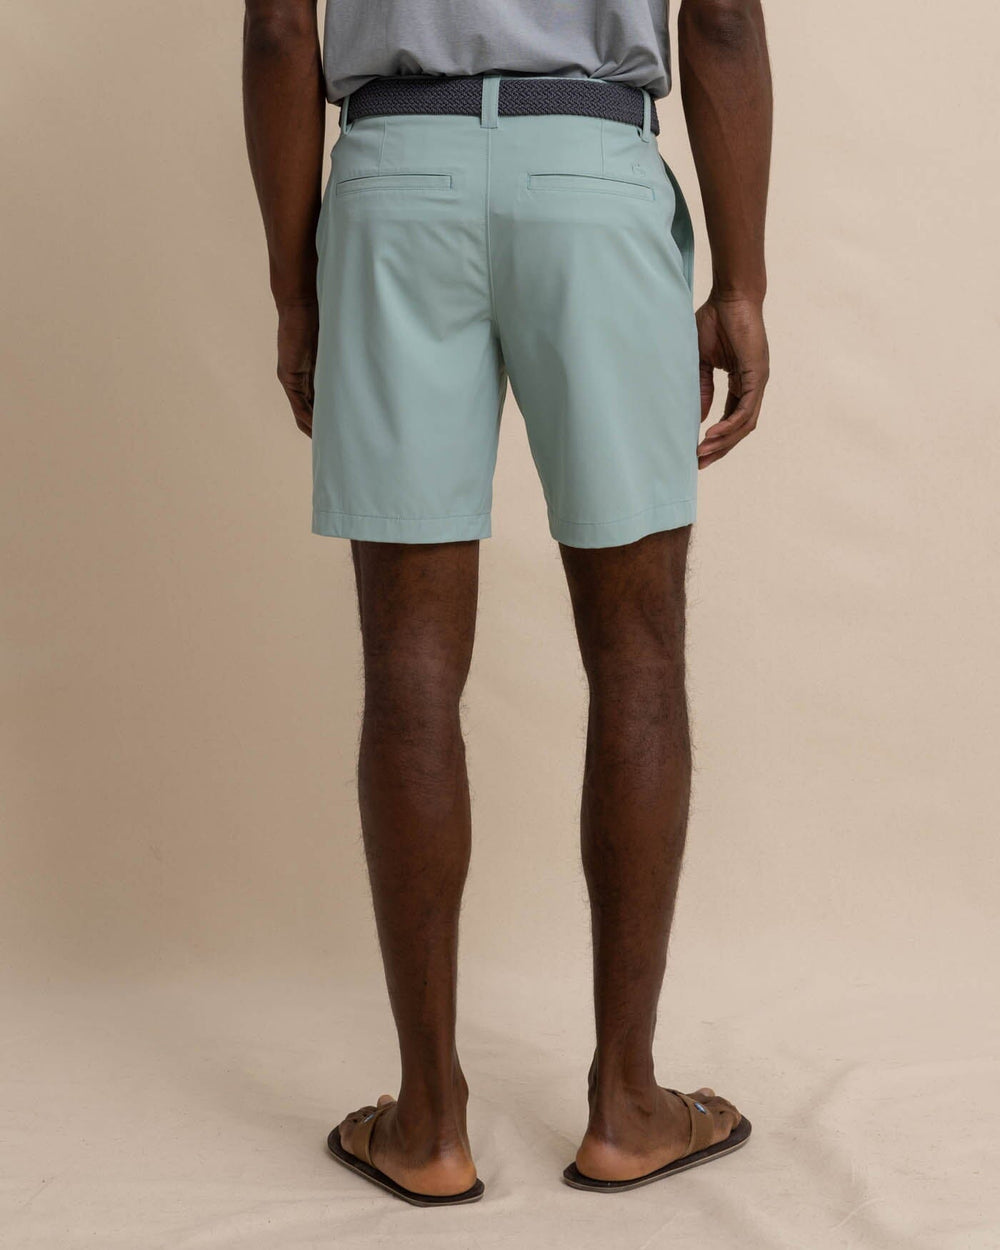 The back view of the Southern Tide gulf 8 inch brrr die performance short by Southern Tide - Green Surf